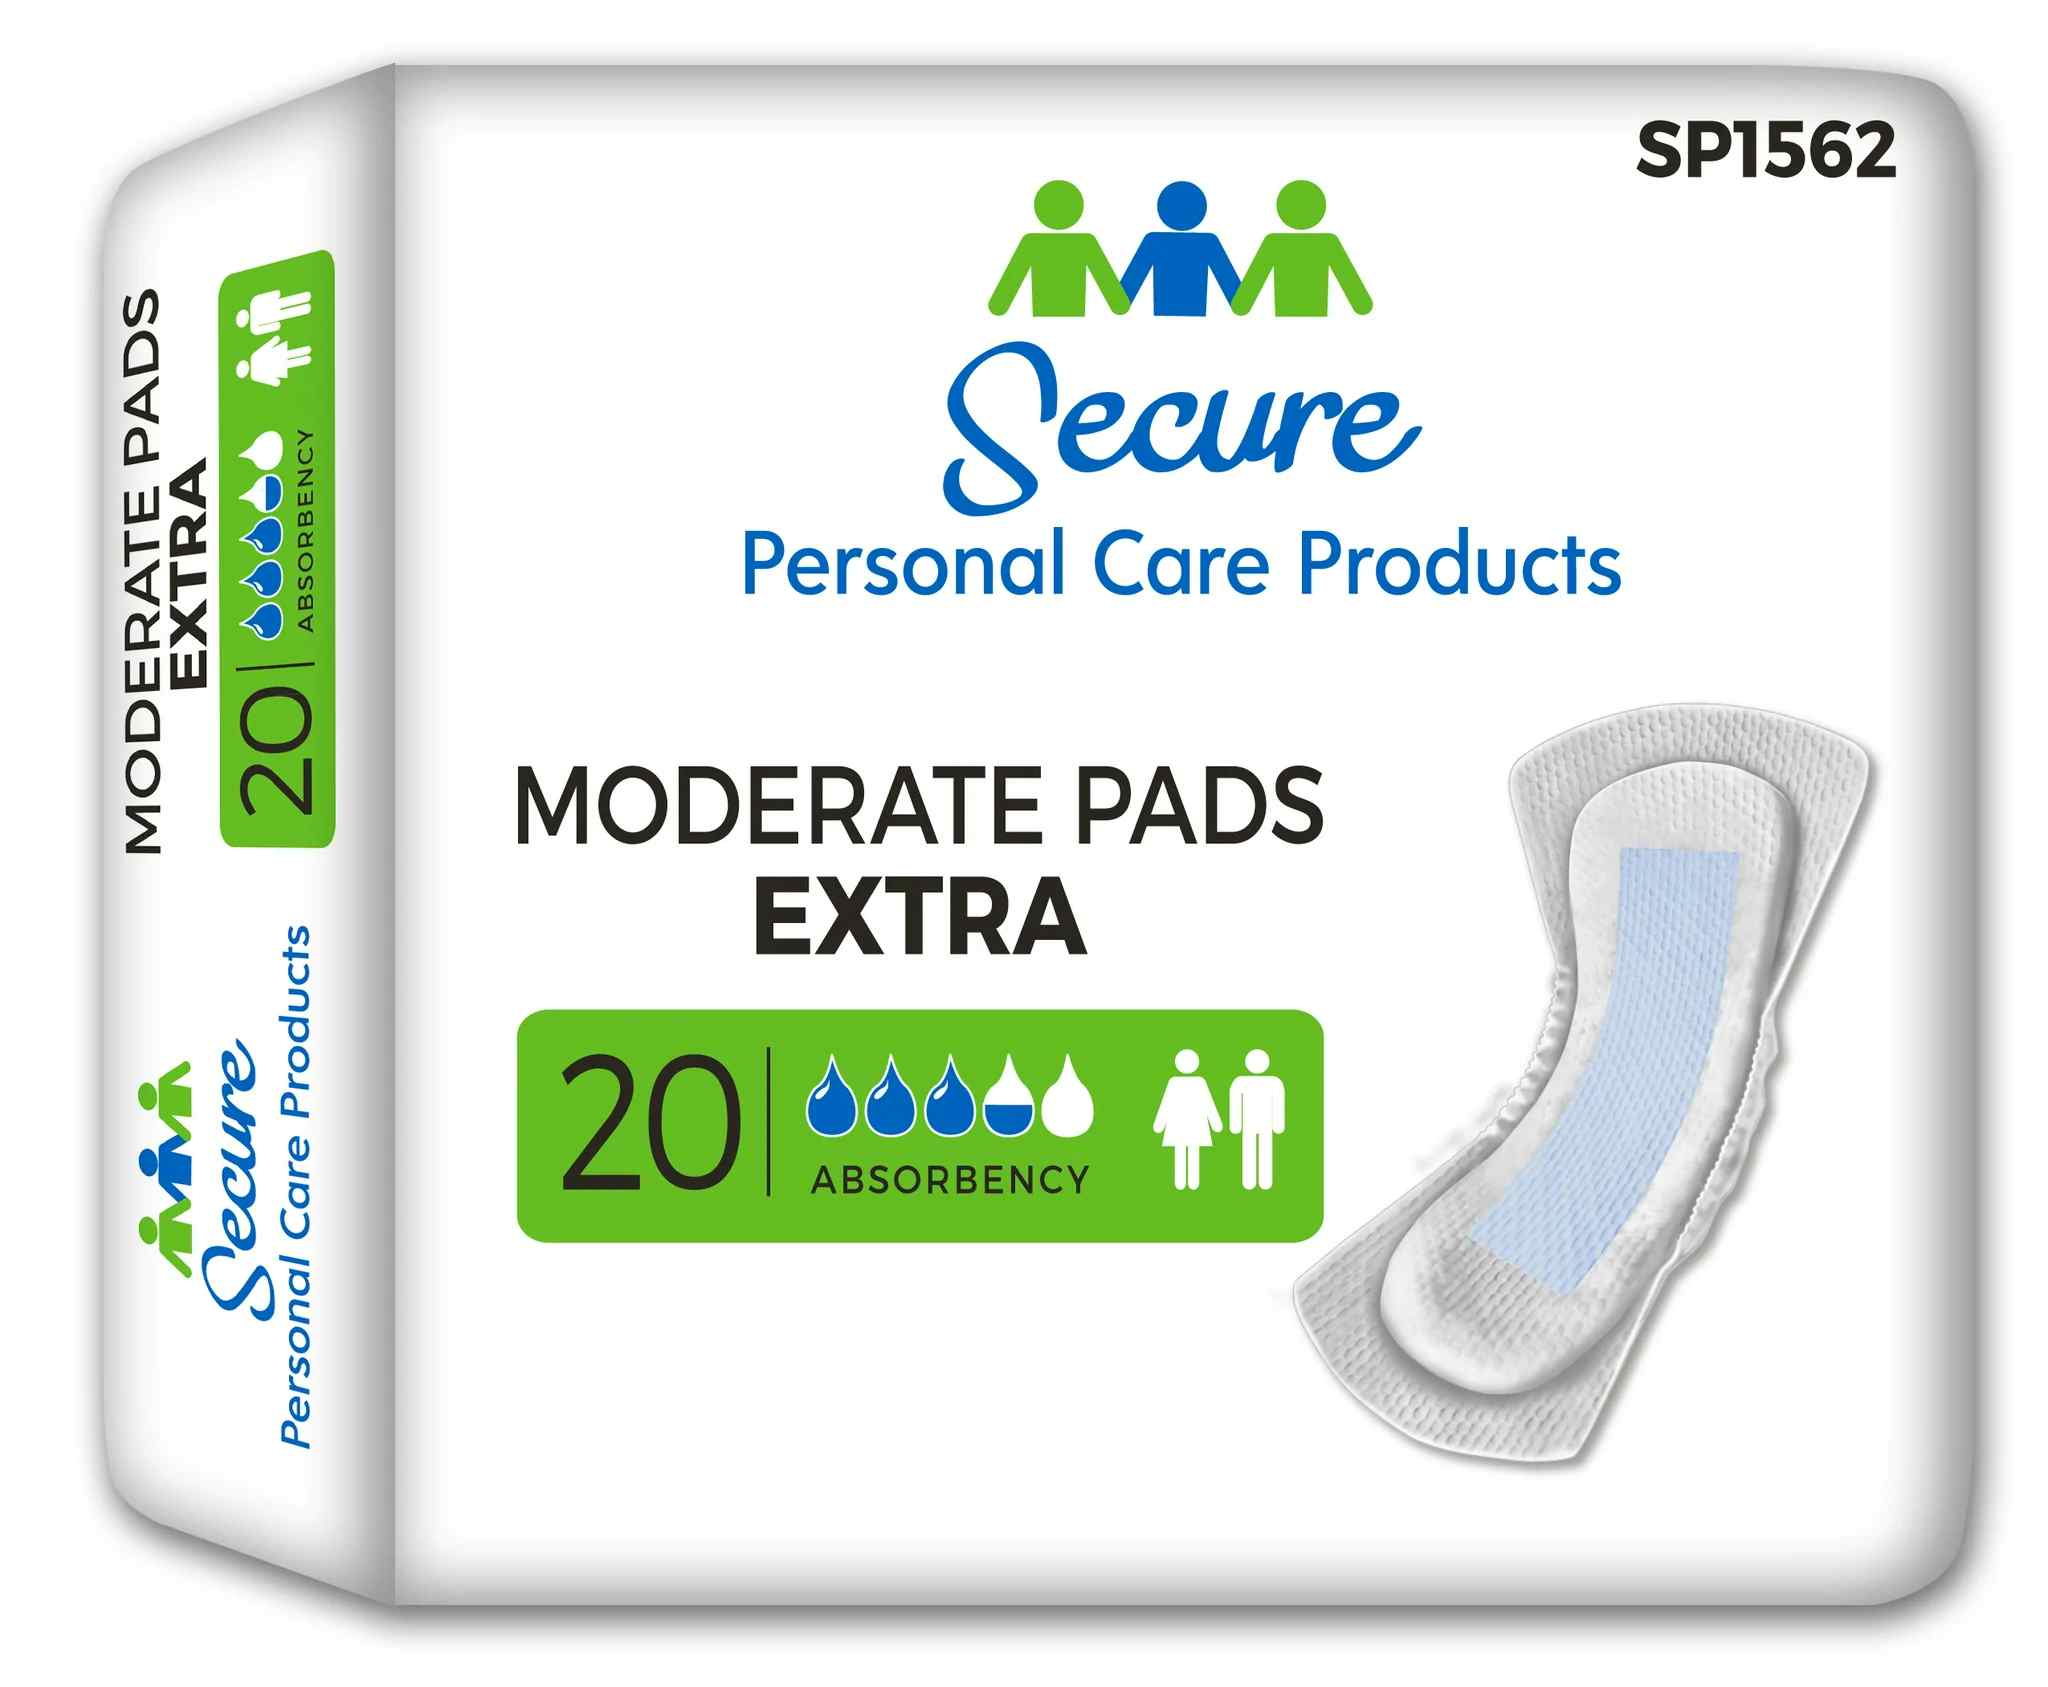 Secure Personal Care Products Moderate Bladder Control Pads Extra, SP1562, Case of 180 (9 Bags)